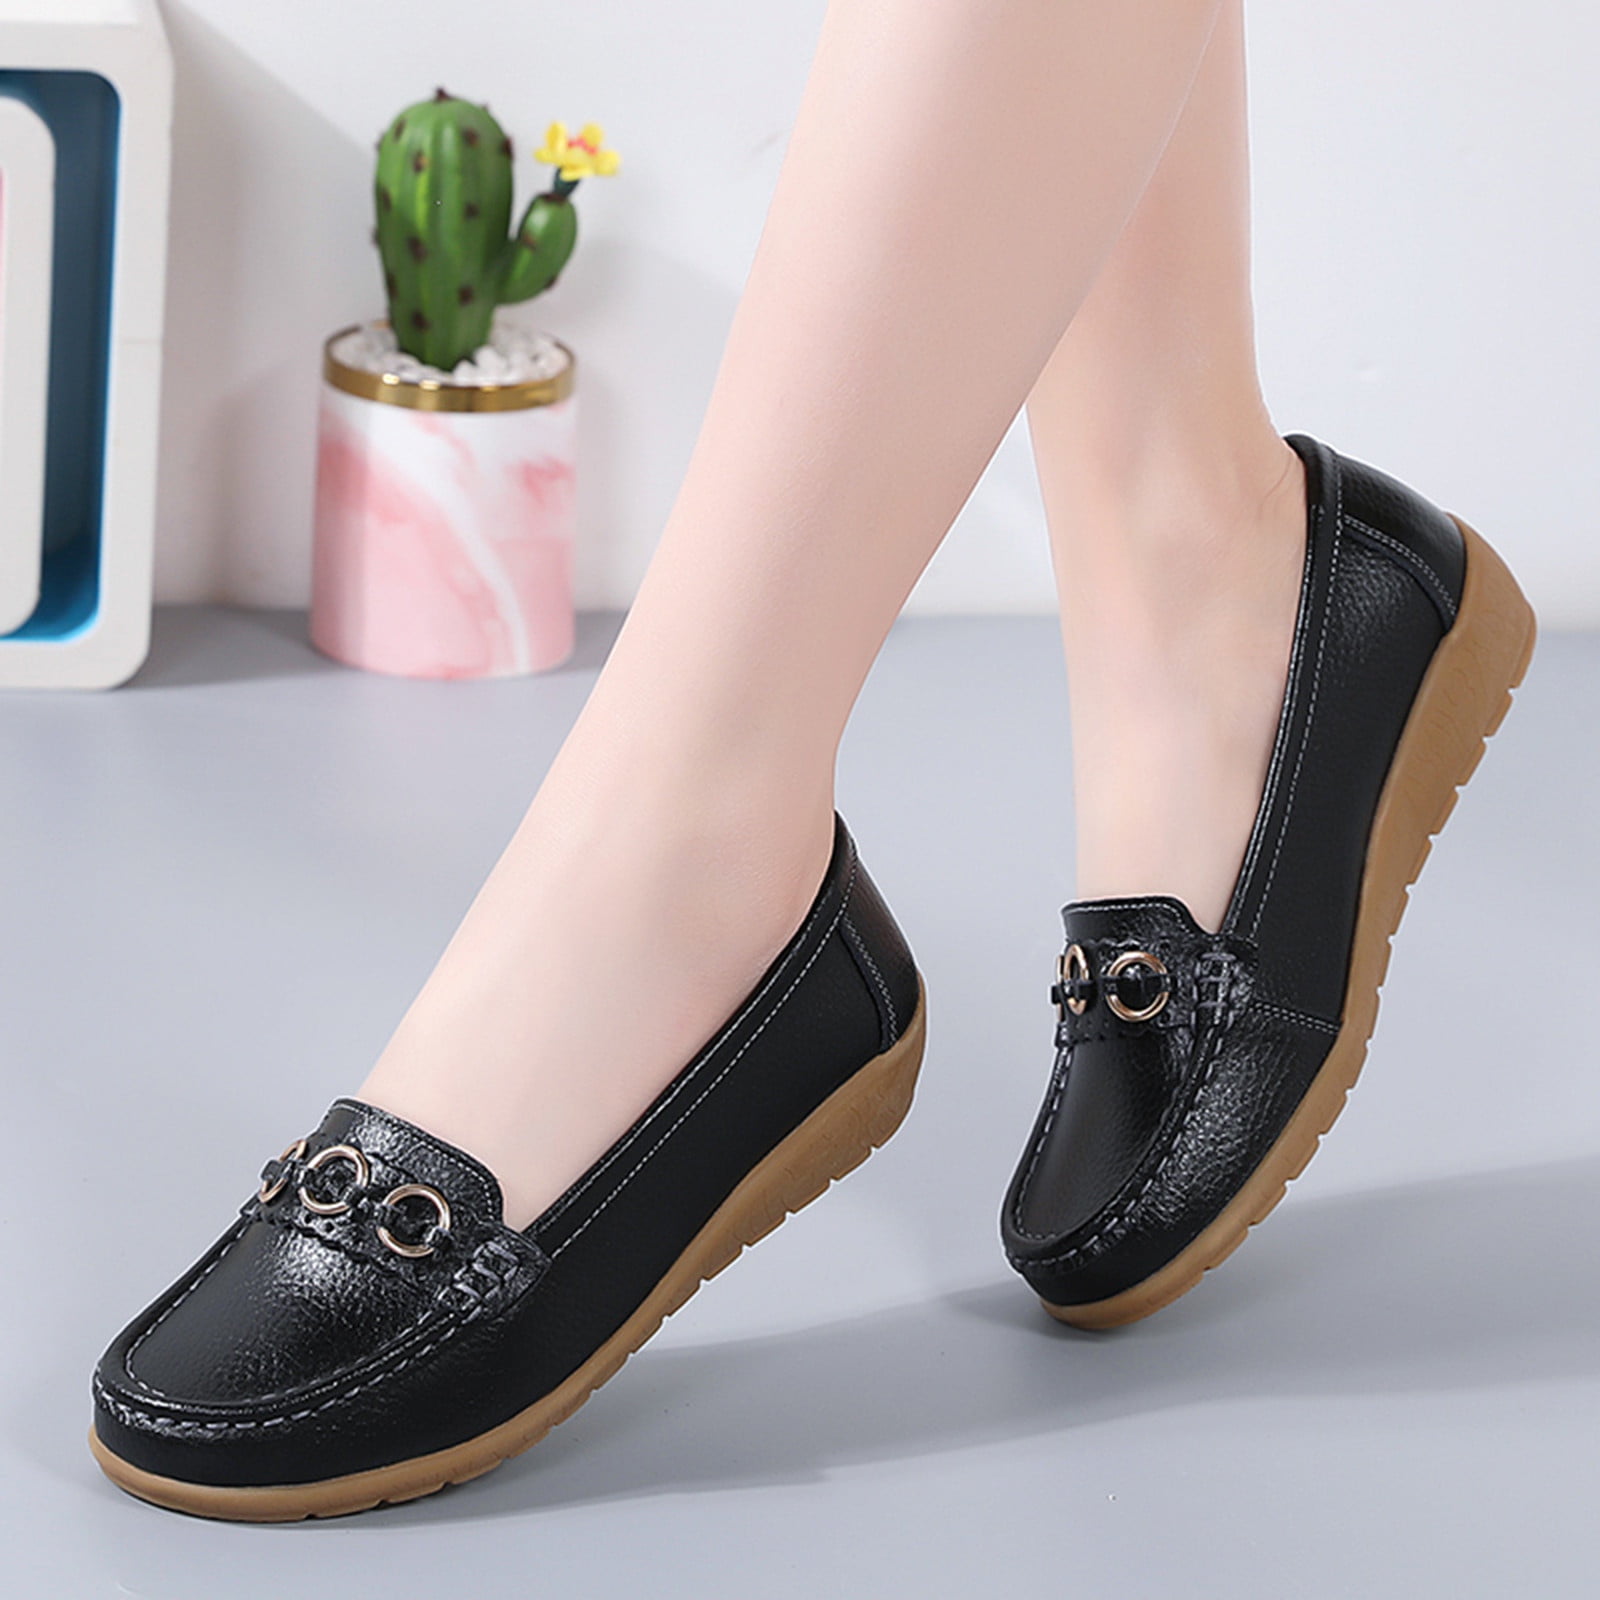 TOWED22 Womens Flats,Women's Pointed Toe Mules Slides Rhinestone Wedding  Flats Shoes Slip-on Backless Loafer,Black 